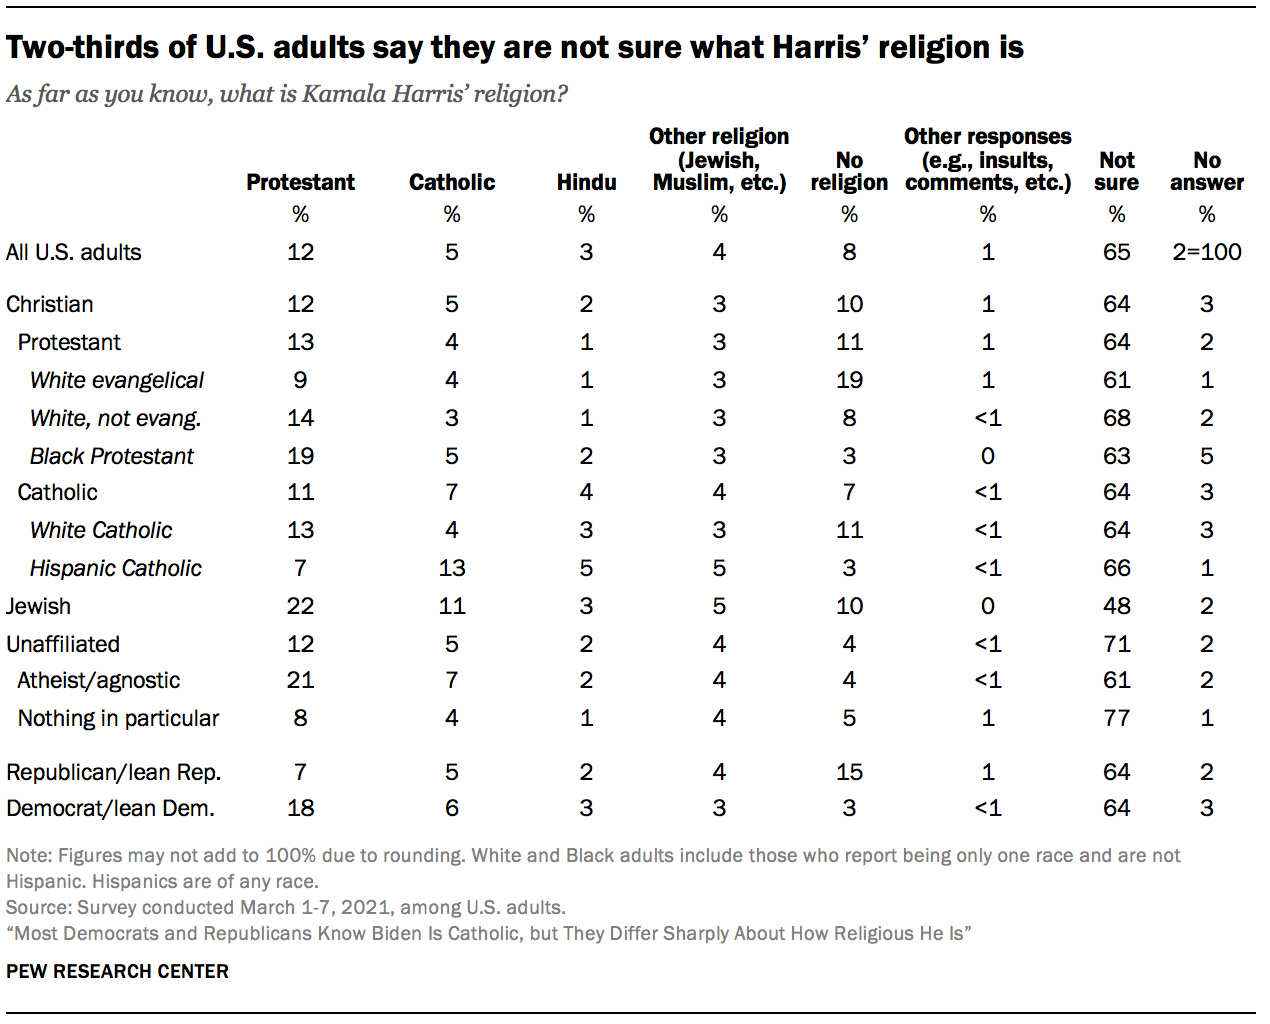 Two-thirds of U.S. adults say they are not sure what Harris’ religion is